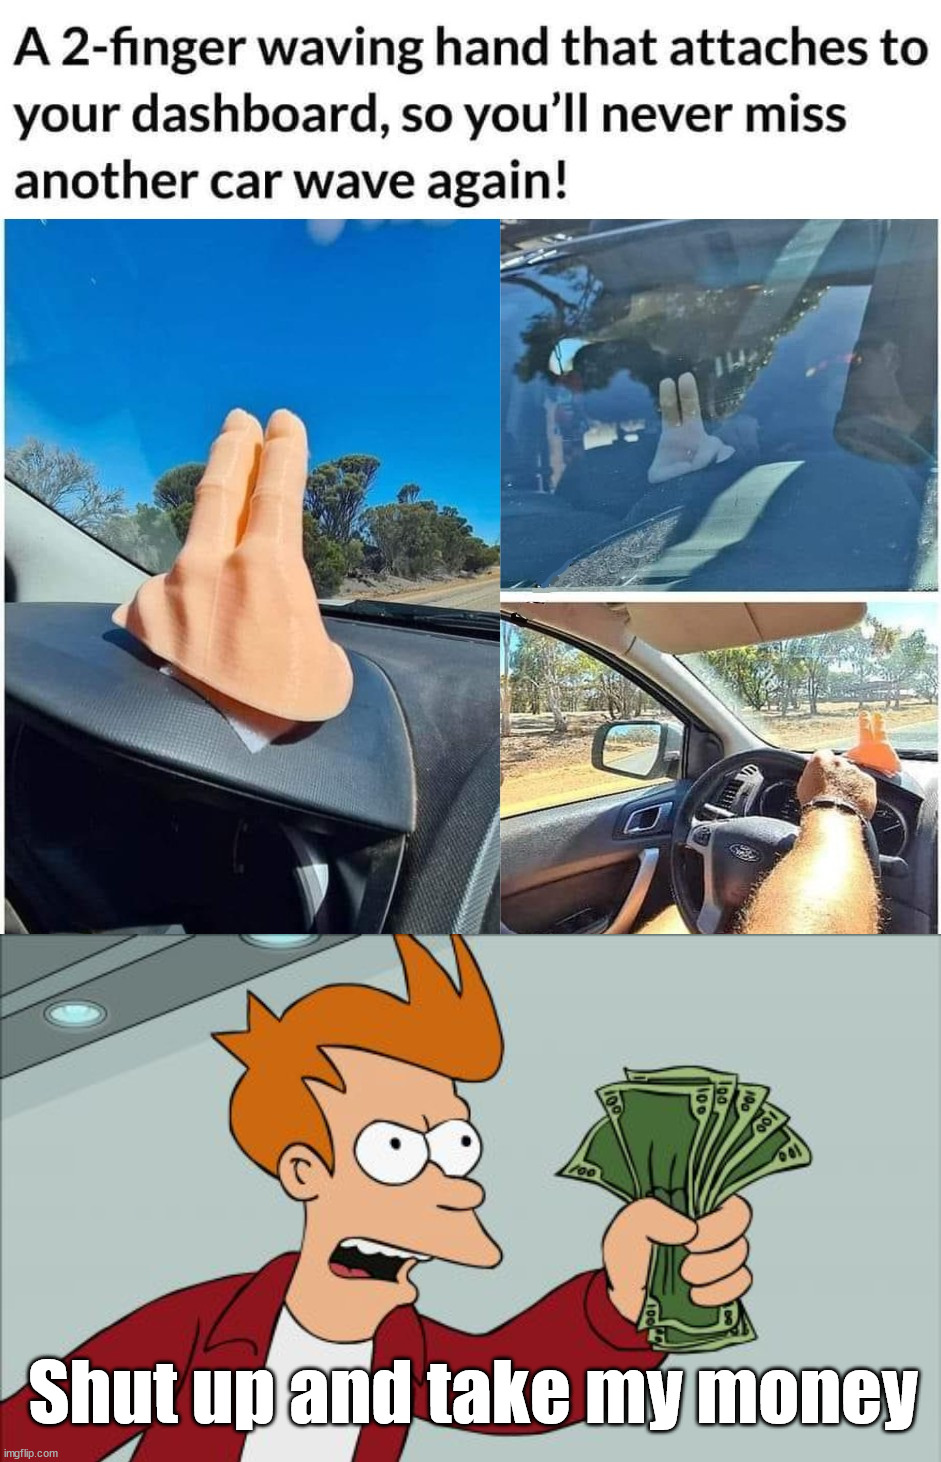 Cool way to make people wave | Shut up and take my money | image tagged in memes,shut up and take my money fry,driving | made w/ Imgflip meme maker